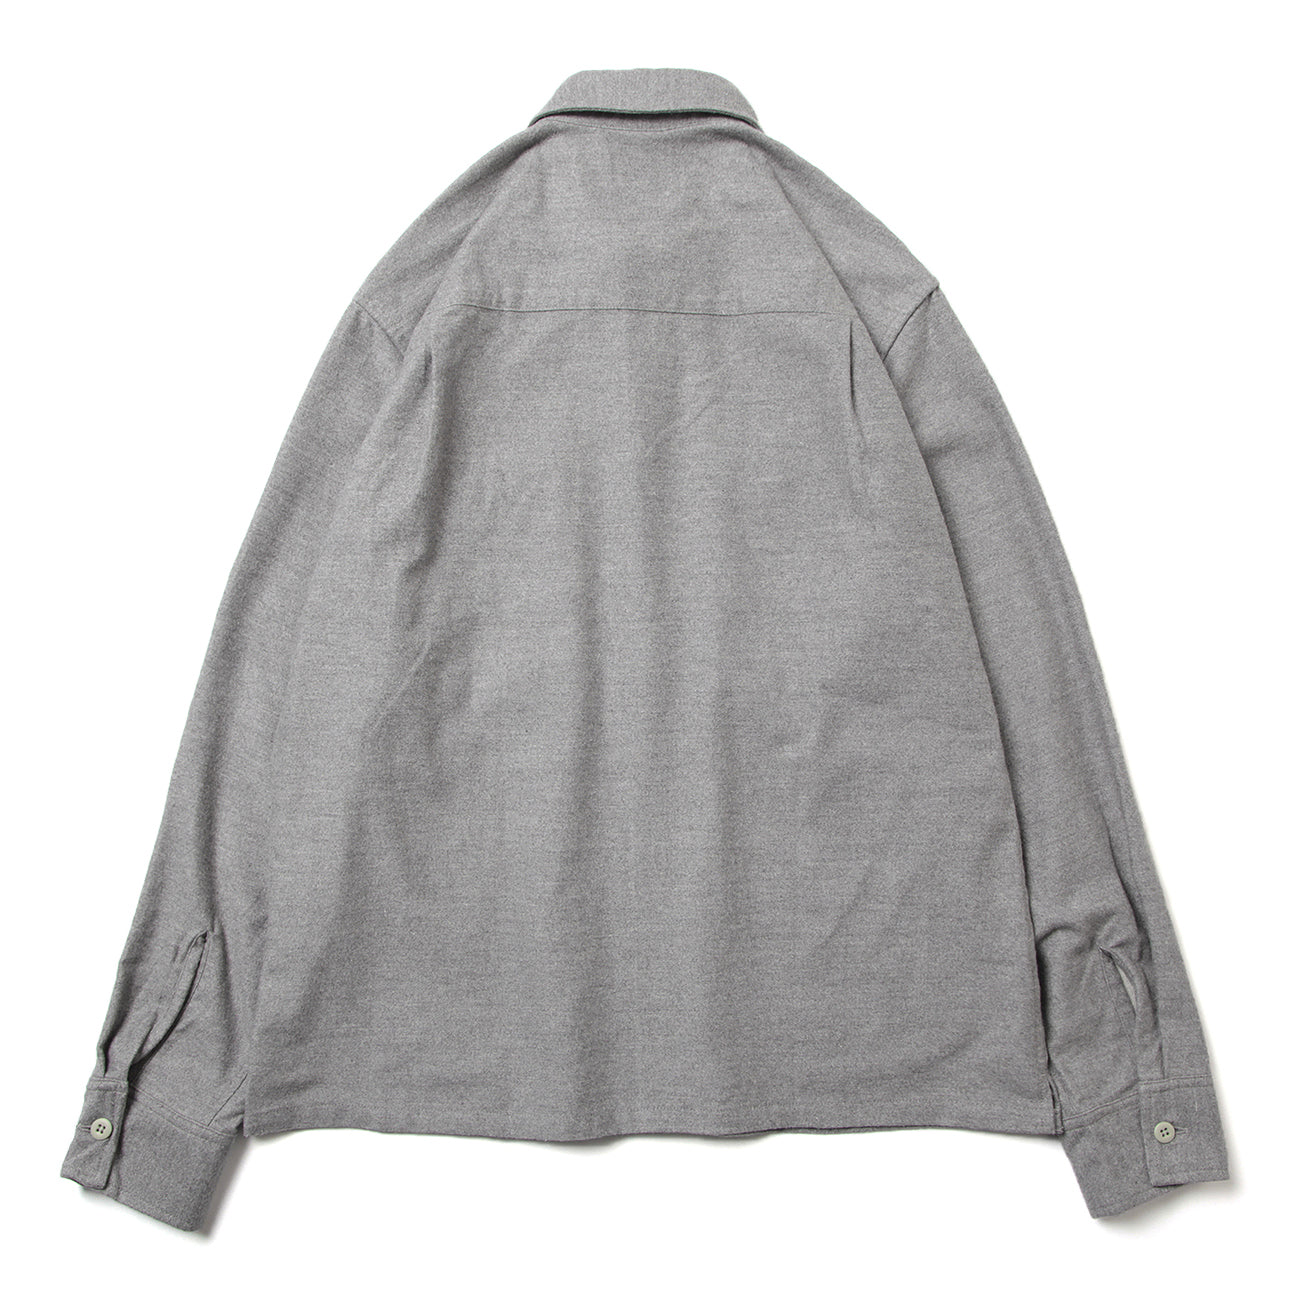 SD SHIRTS (FLANNEL) - GRAY